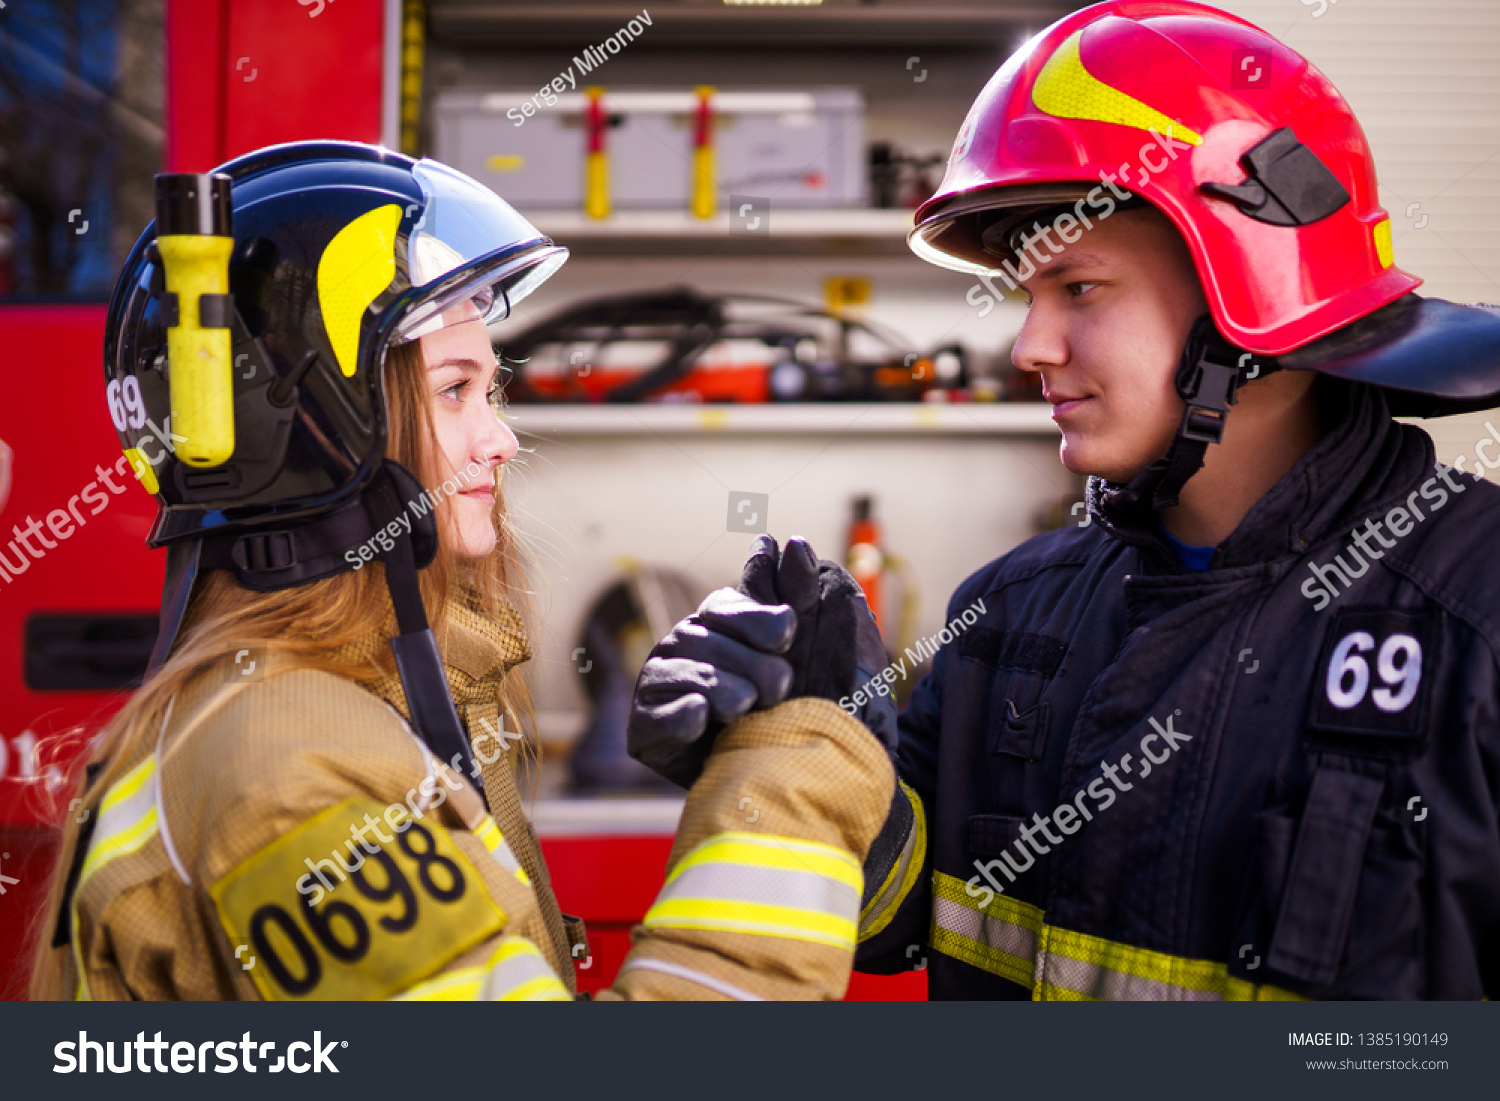 Side view of woman firefighter and man wearing helmets doing a handshake near fire engine #1385190149